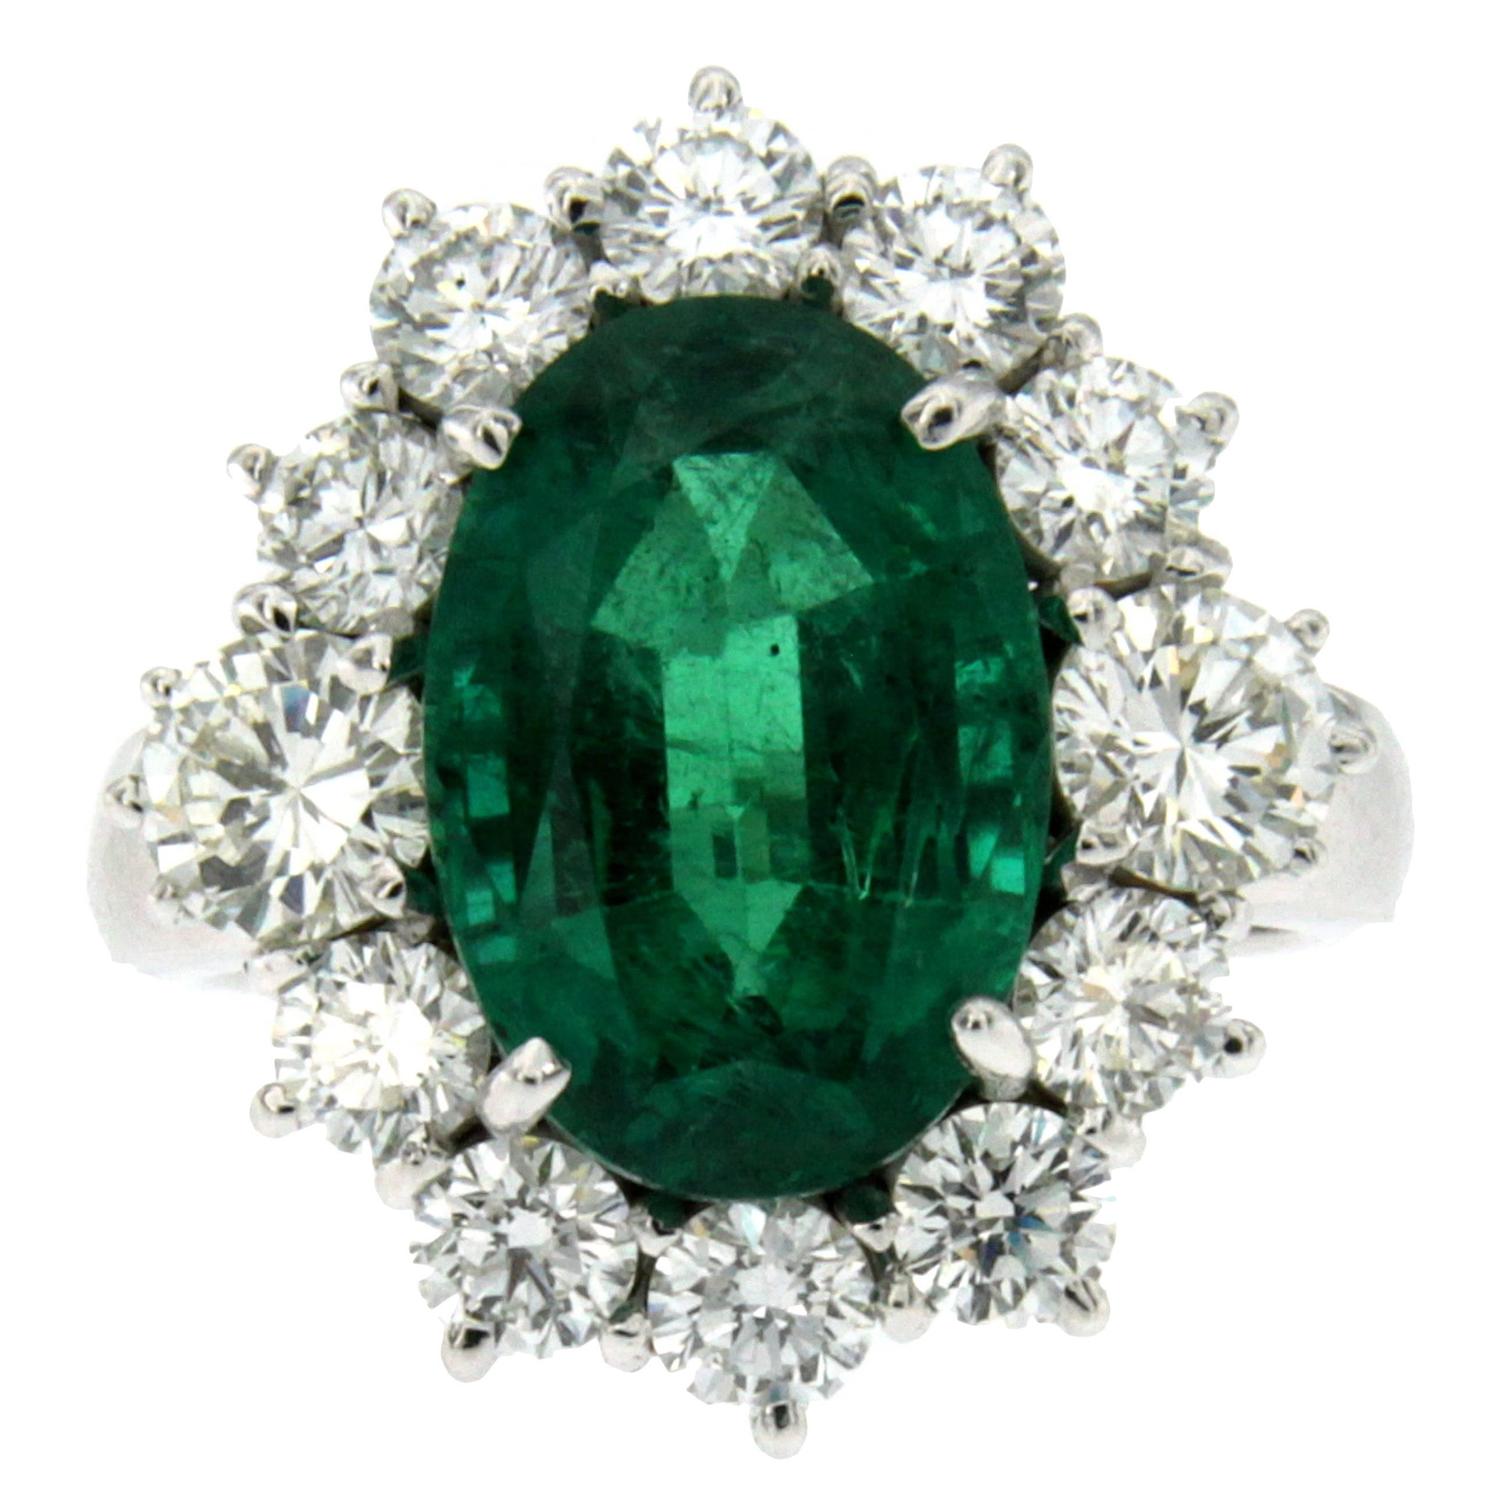 Exceptional 6.60 Carat Emerald 3.30 Carats Diamonds Cluster Ring at 1stdibs